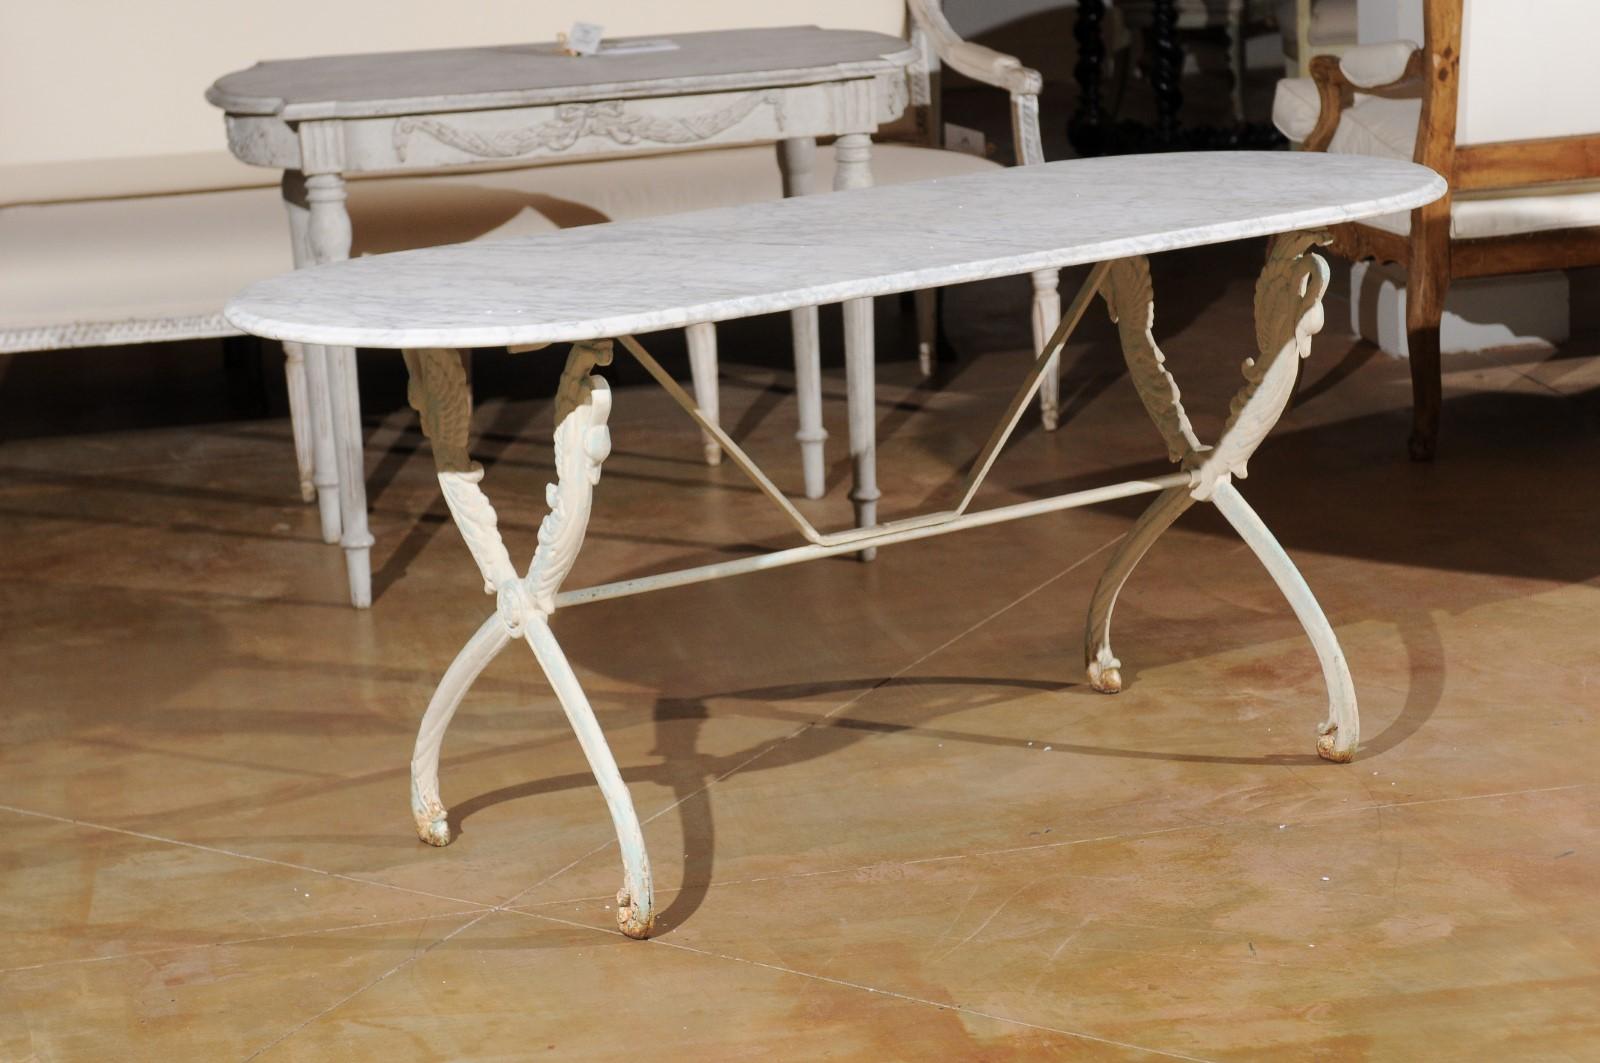 A French cast iron table from the 20th century, with oval Carrara marble top and swan motifs. Born in France during the 20th century, this cast iron table features an oval veined Carrara marble top sitting above an X-frame base adorned with delicate